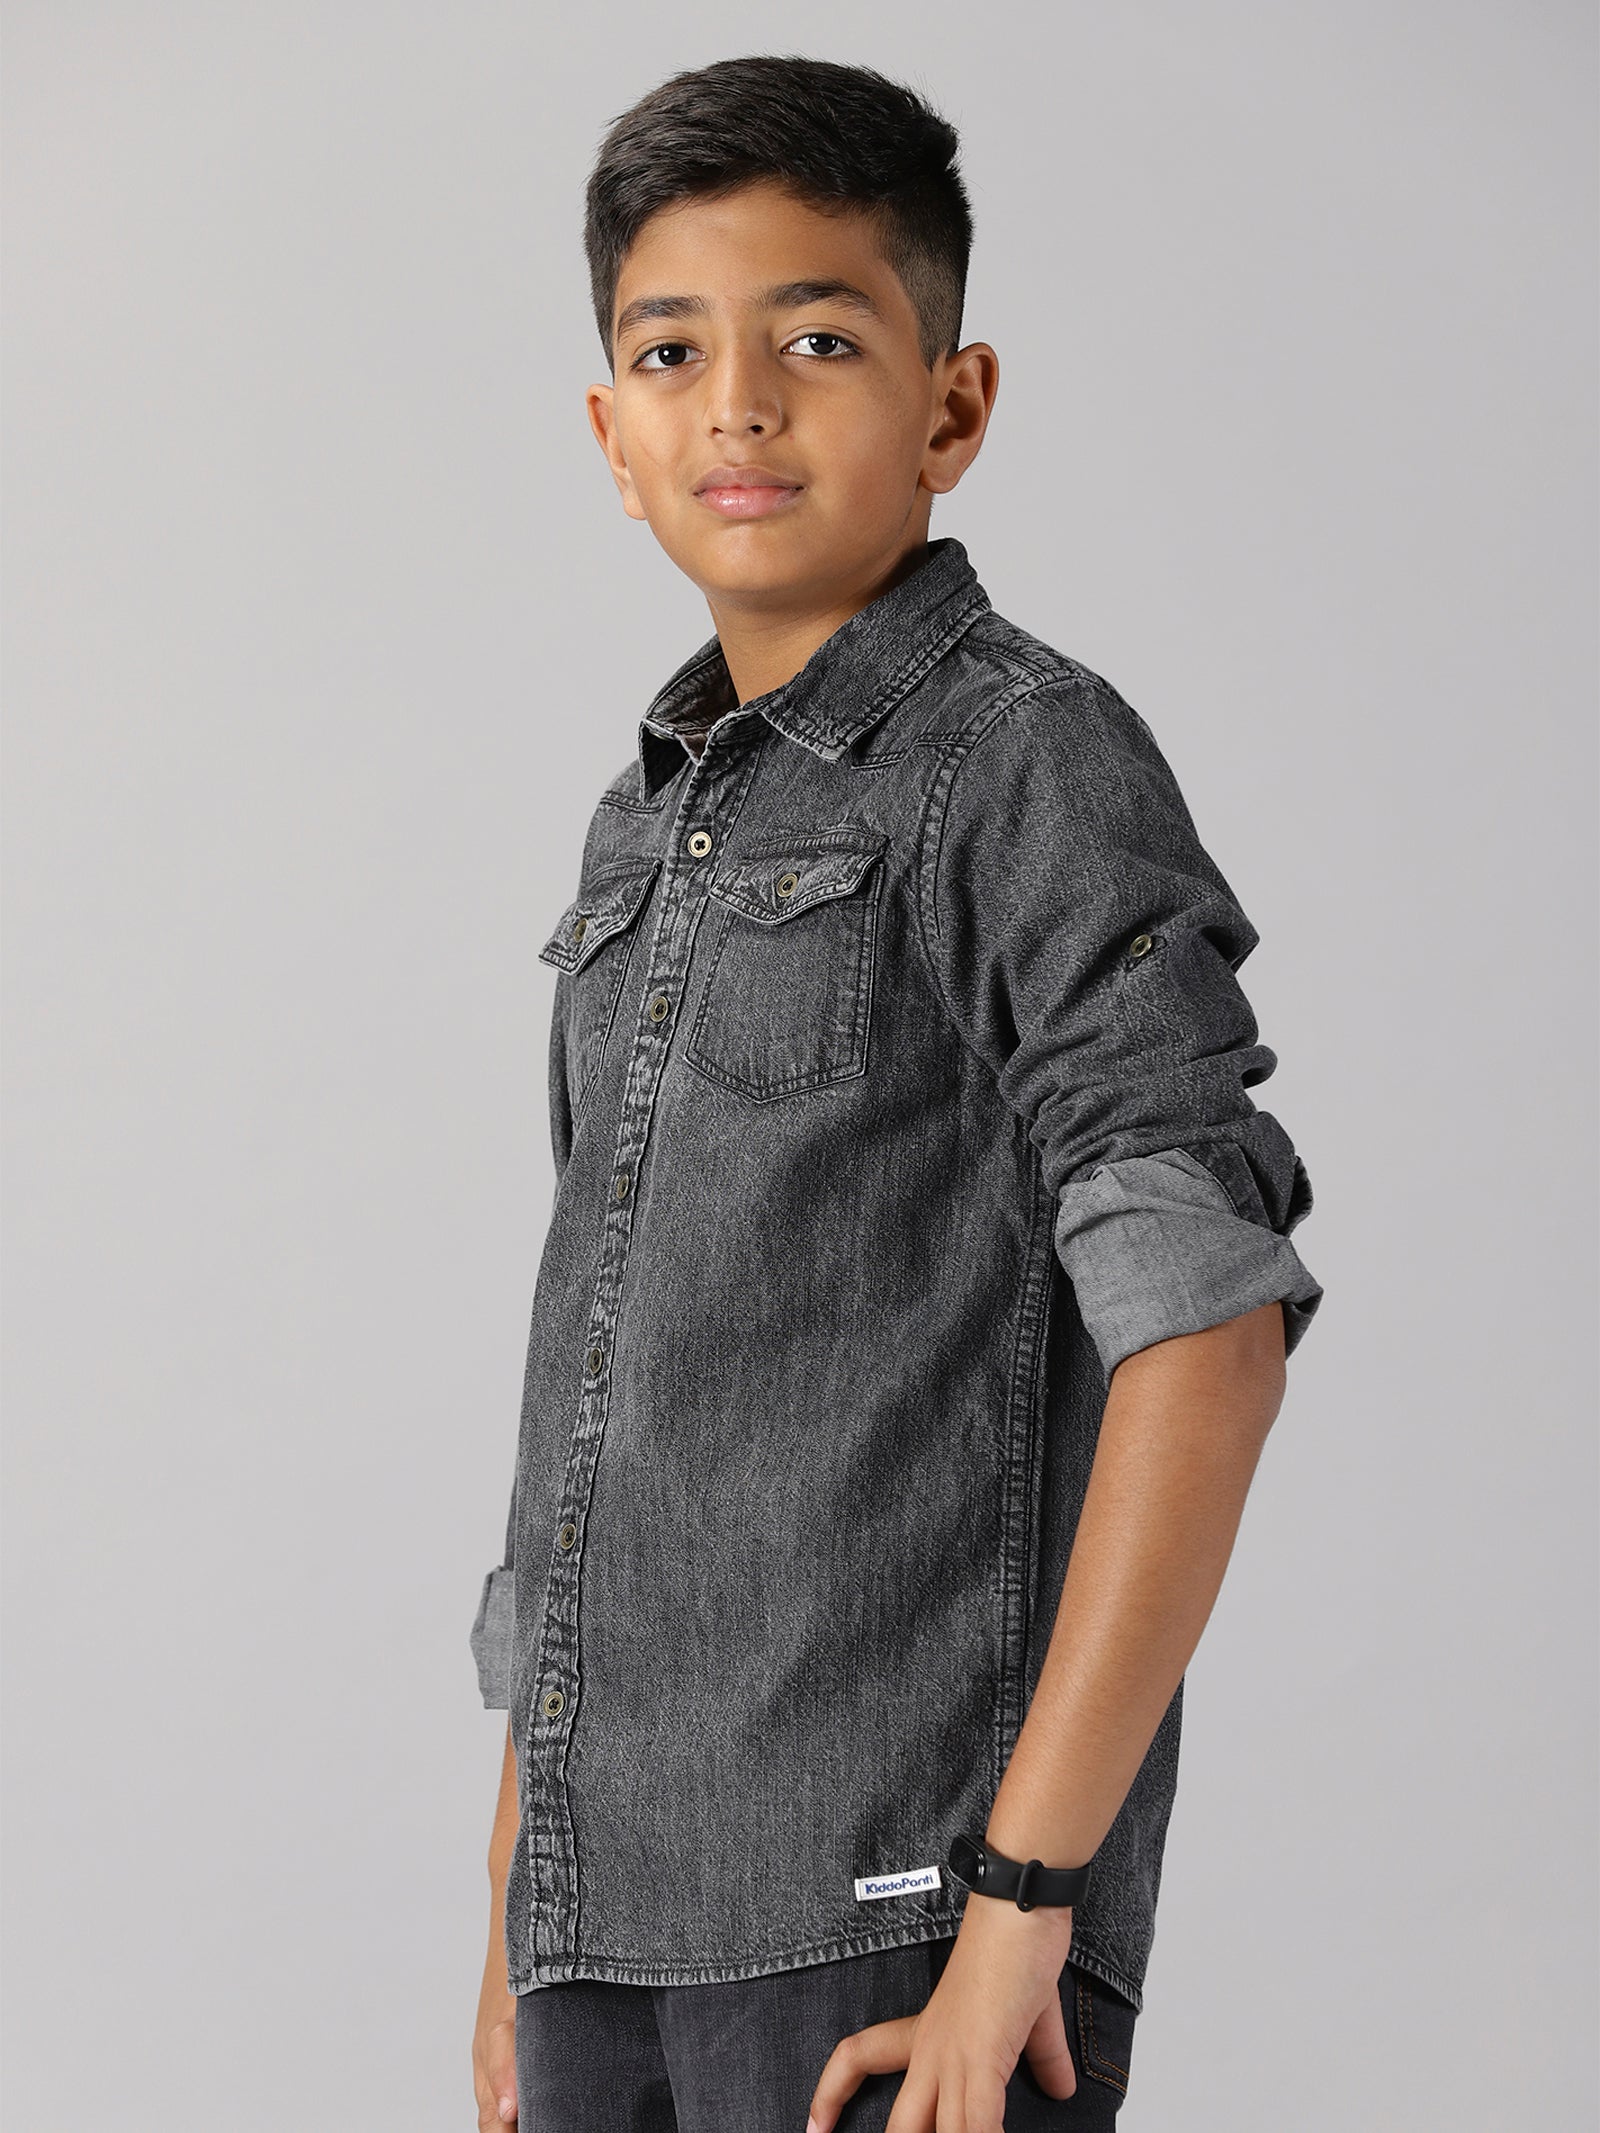 Buy Denim Shirt Charcoal clack Double Pocket (XL) at Amazon.in